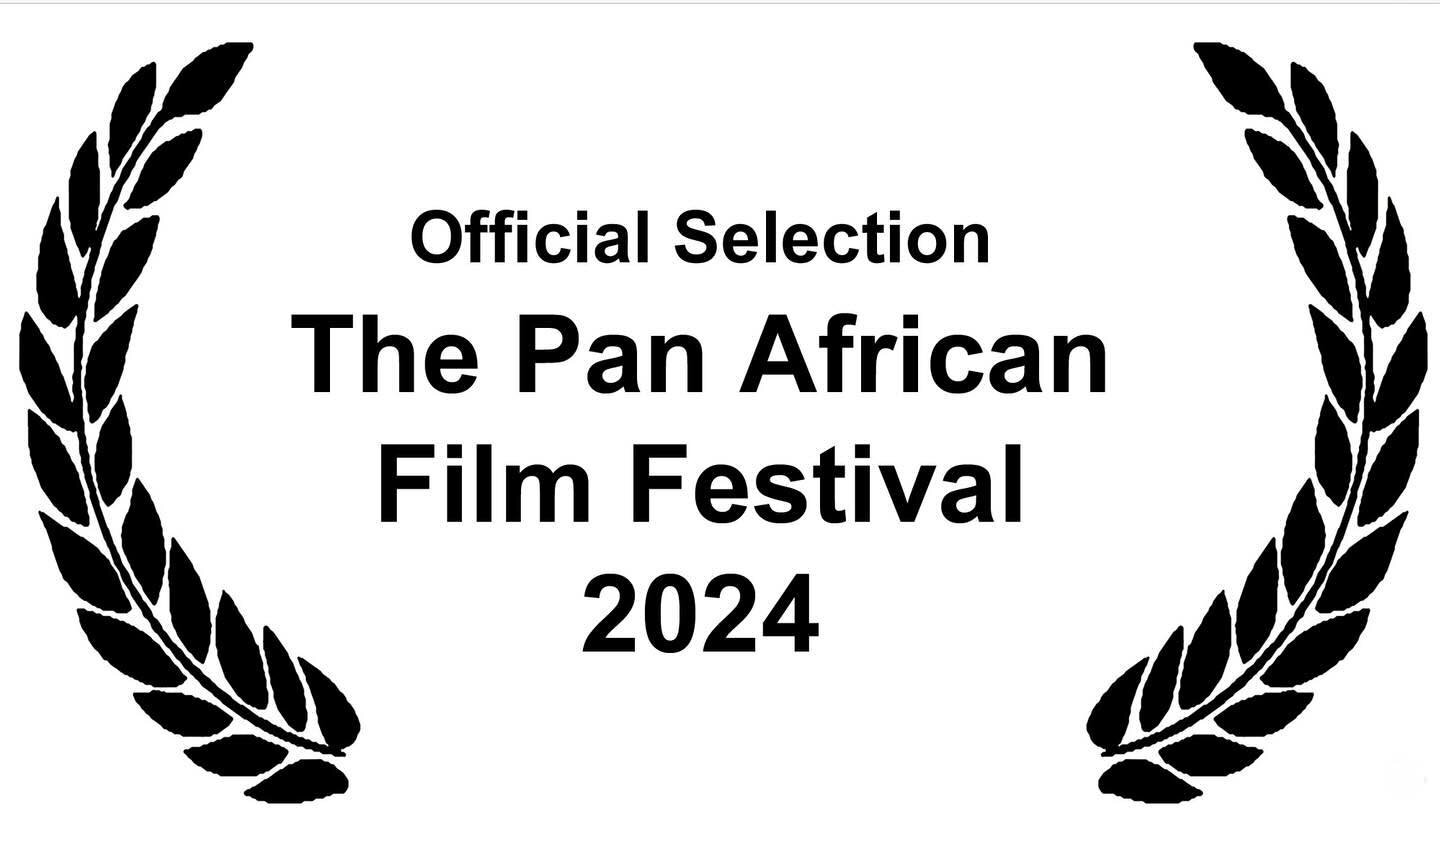 Posted @withregram &bull; @keepersoftheflame.shortfilm 🎉🎉🎉🎉🎉🎉🎉
𝓚𝓮𝓮𝓹𝓮𝓻𝓼 𝓸𝓯 𝓽𝓱𝓮 𝓕𝓵𝓪𝓶𝓮
 WEST COAST PREMIERE
We celebrate our official selection into the Pan African Film Festival @paffnow .

🎉 🎉 🎉 🎉 🎉 🎉 🎉

Thank you Ayuko 